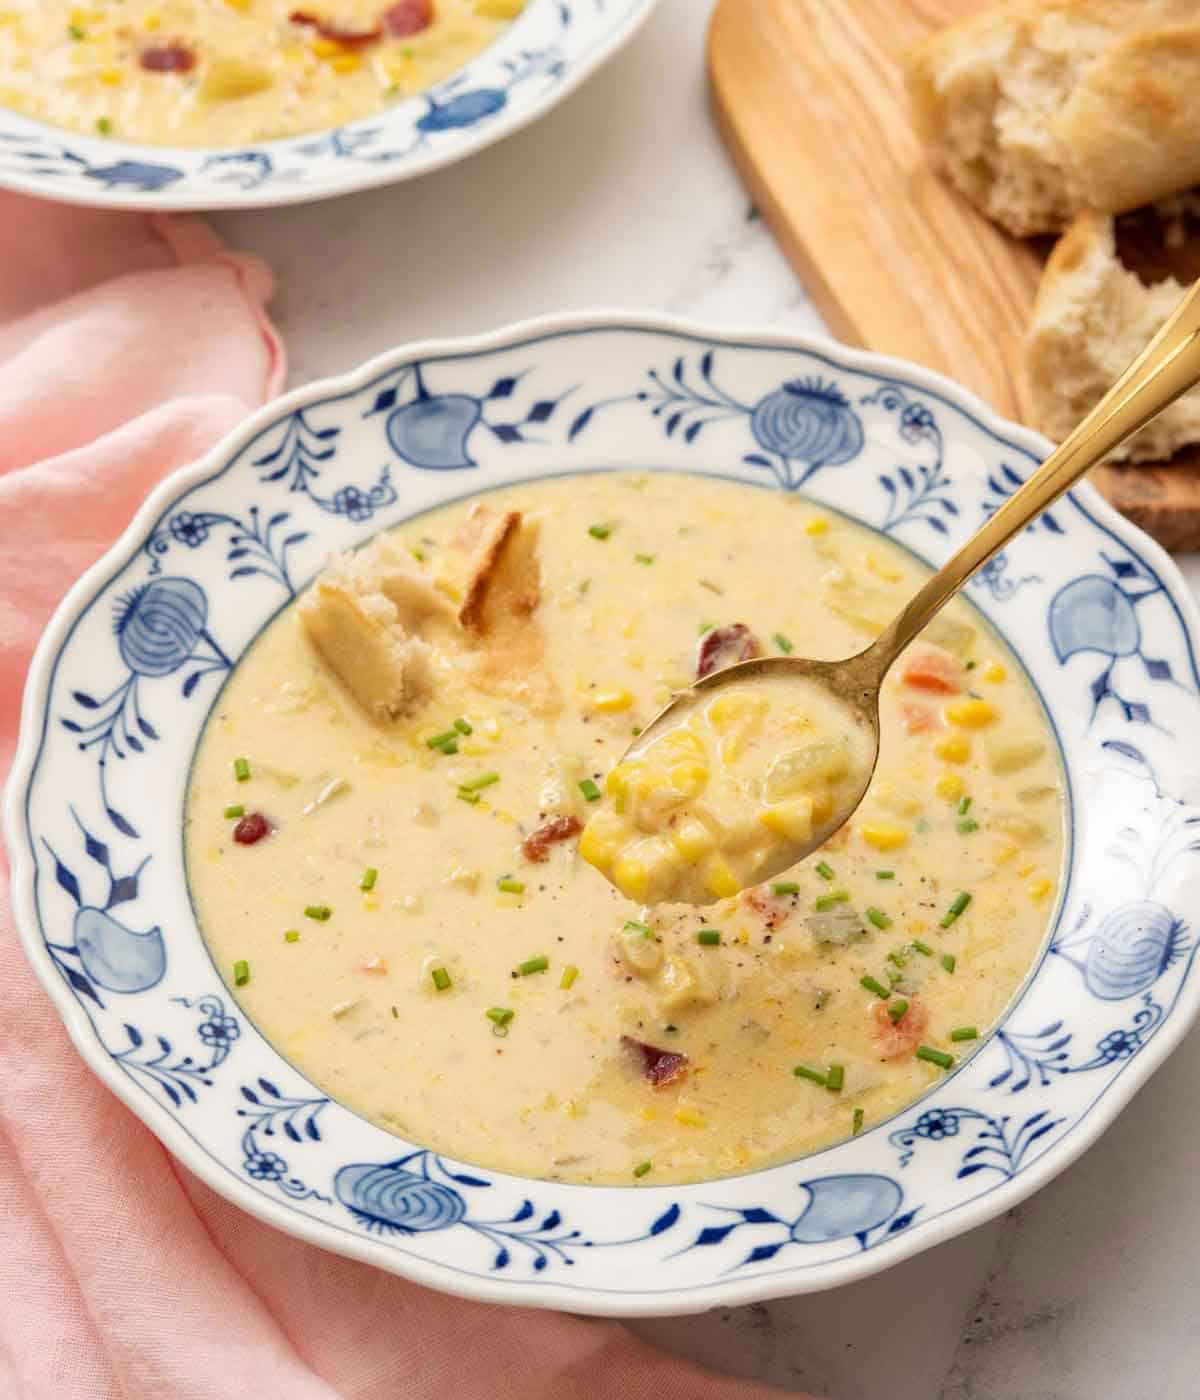 A bowl of corn chowder with a spoonful lifted up.